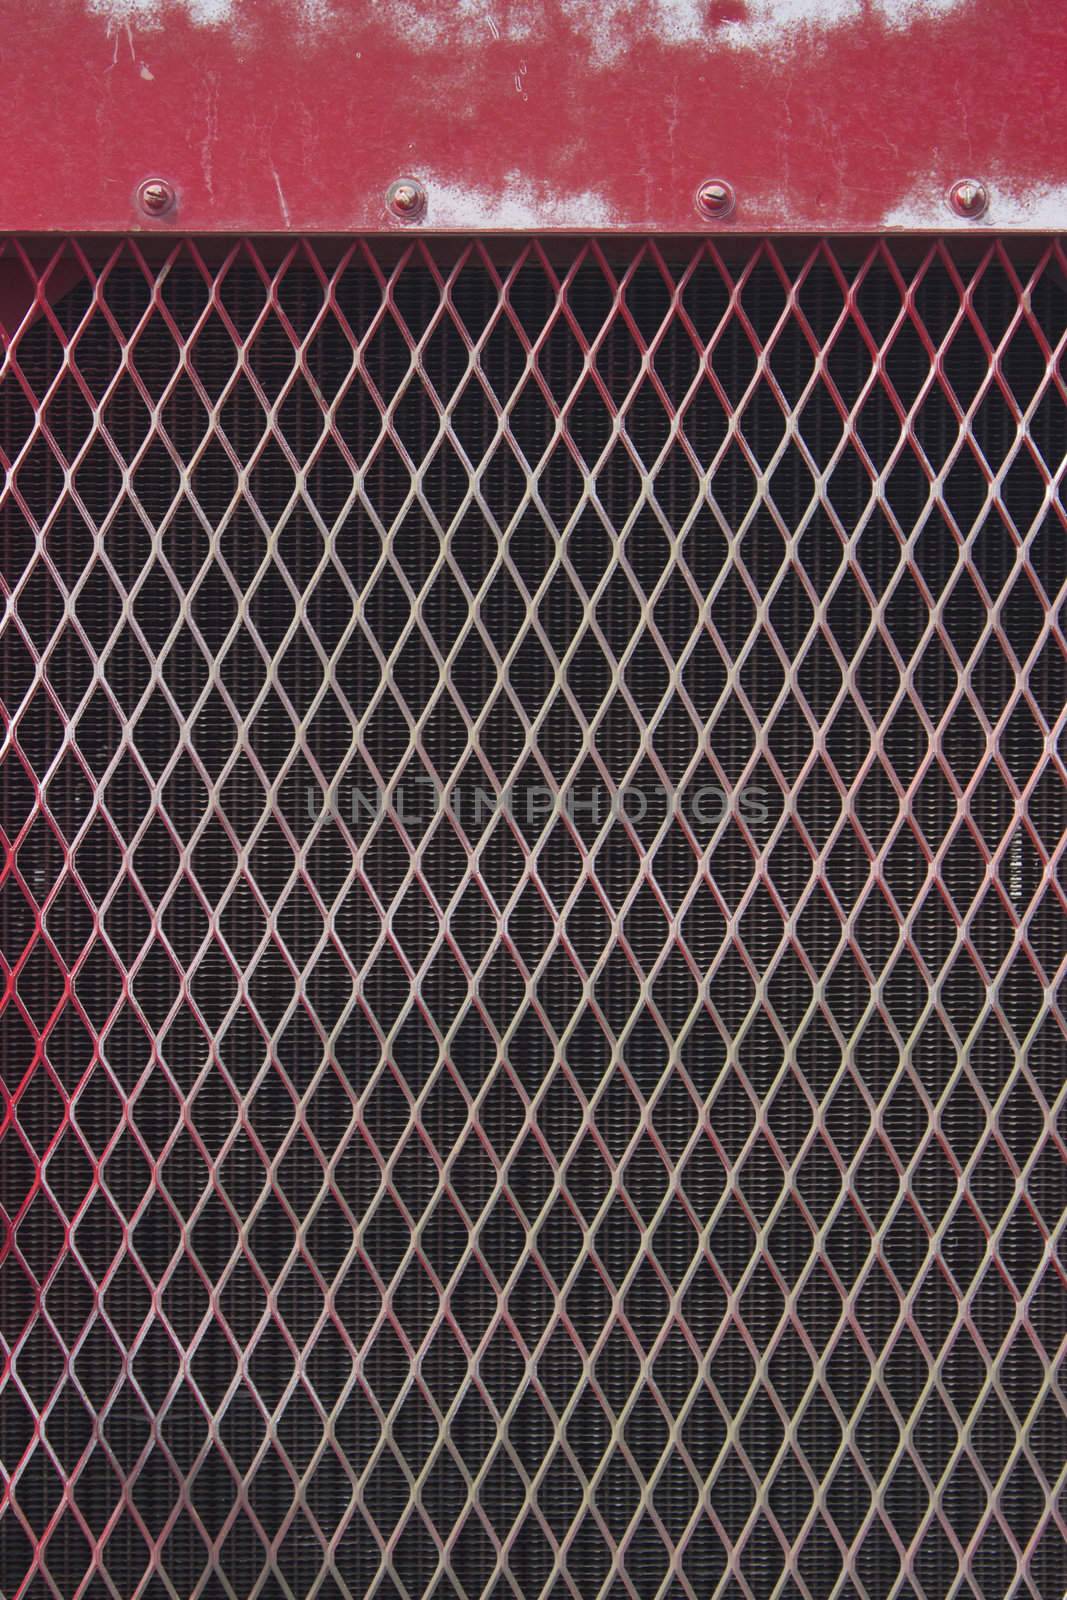 Red metal grate pattern by jeremywhat